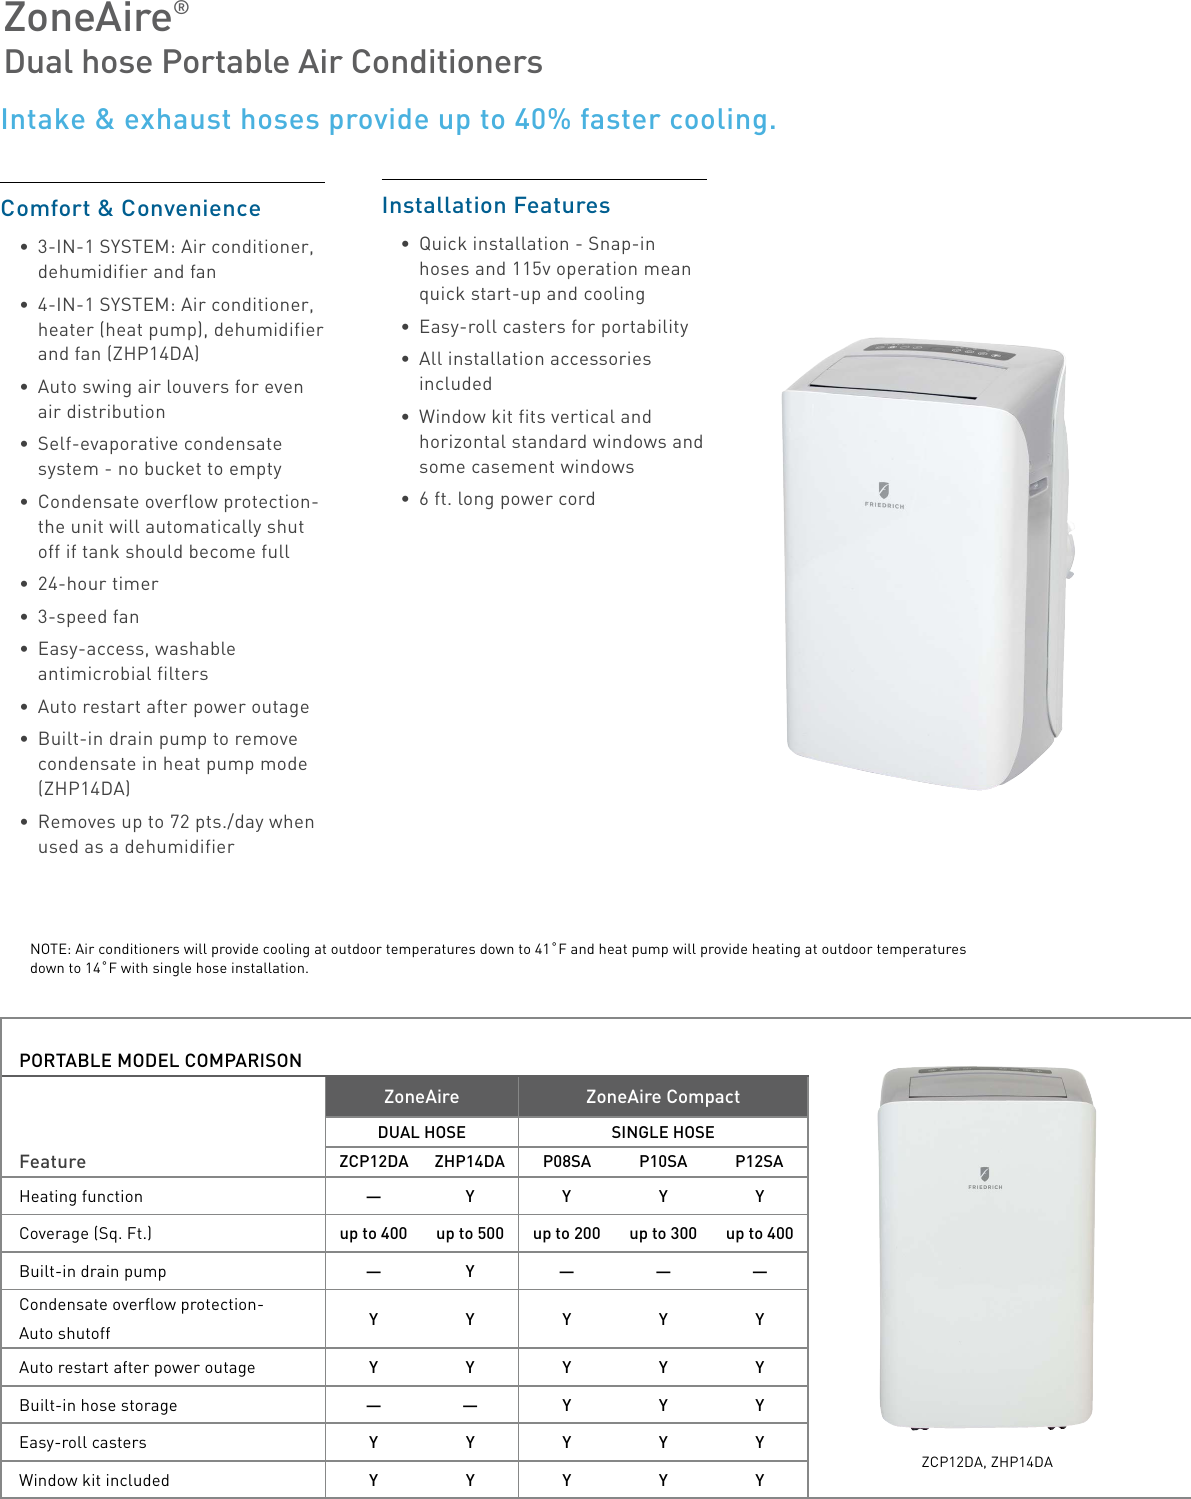 Page 2 of 4 - Friedrich  2019 Portable Air Conditioners Brochure Rev.1